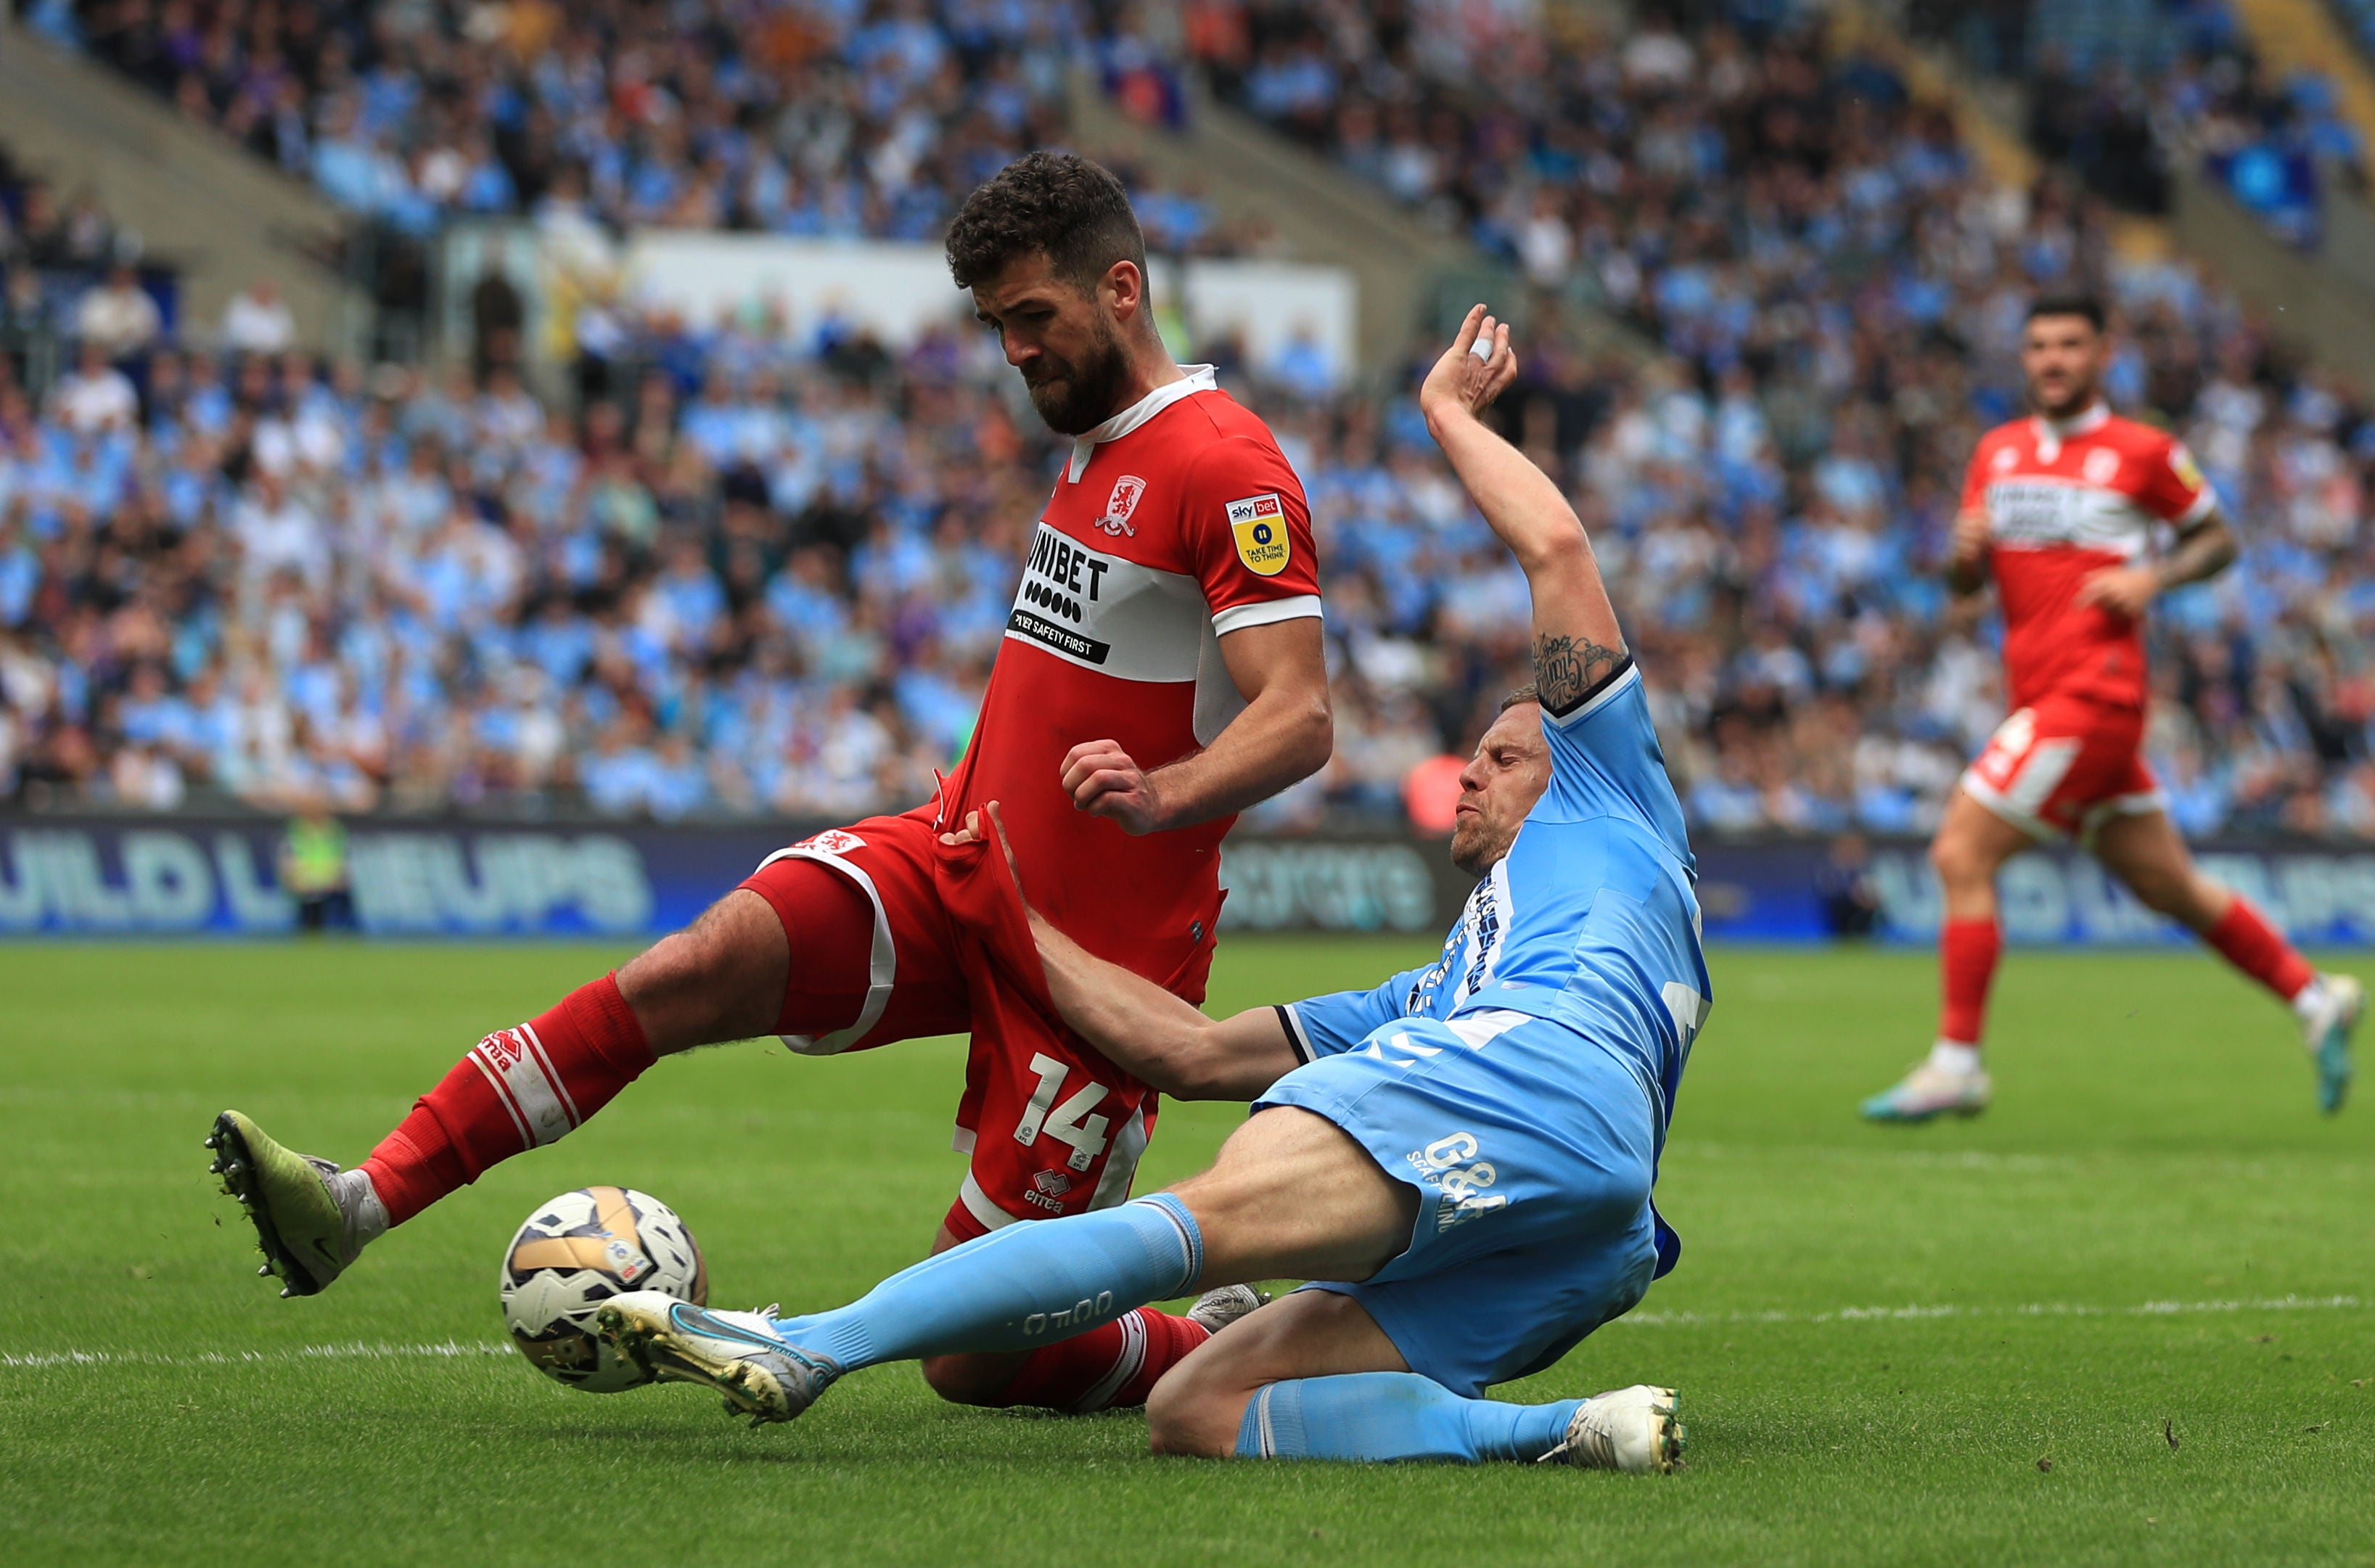 Coventry and Middlesbrough played out a goalless draw in the first leg